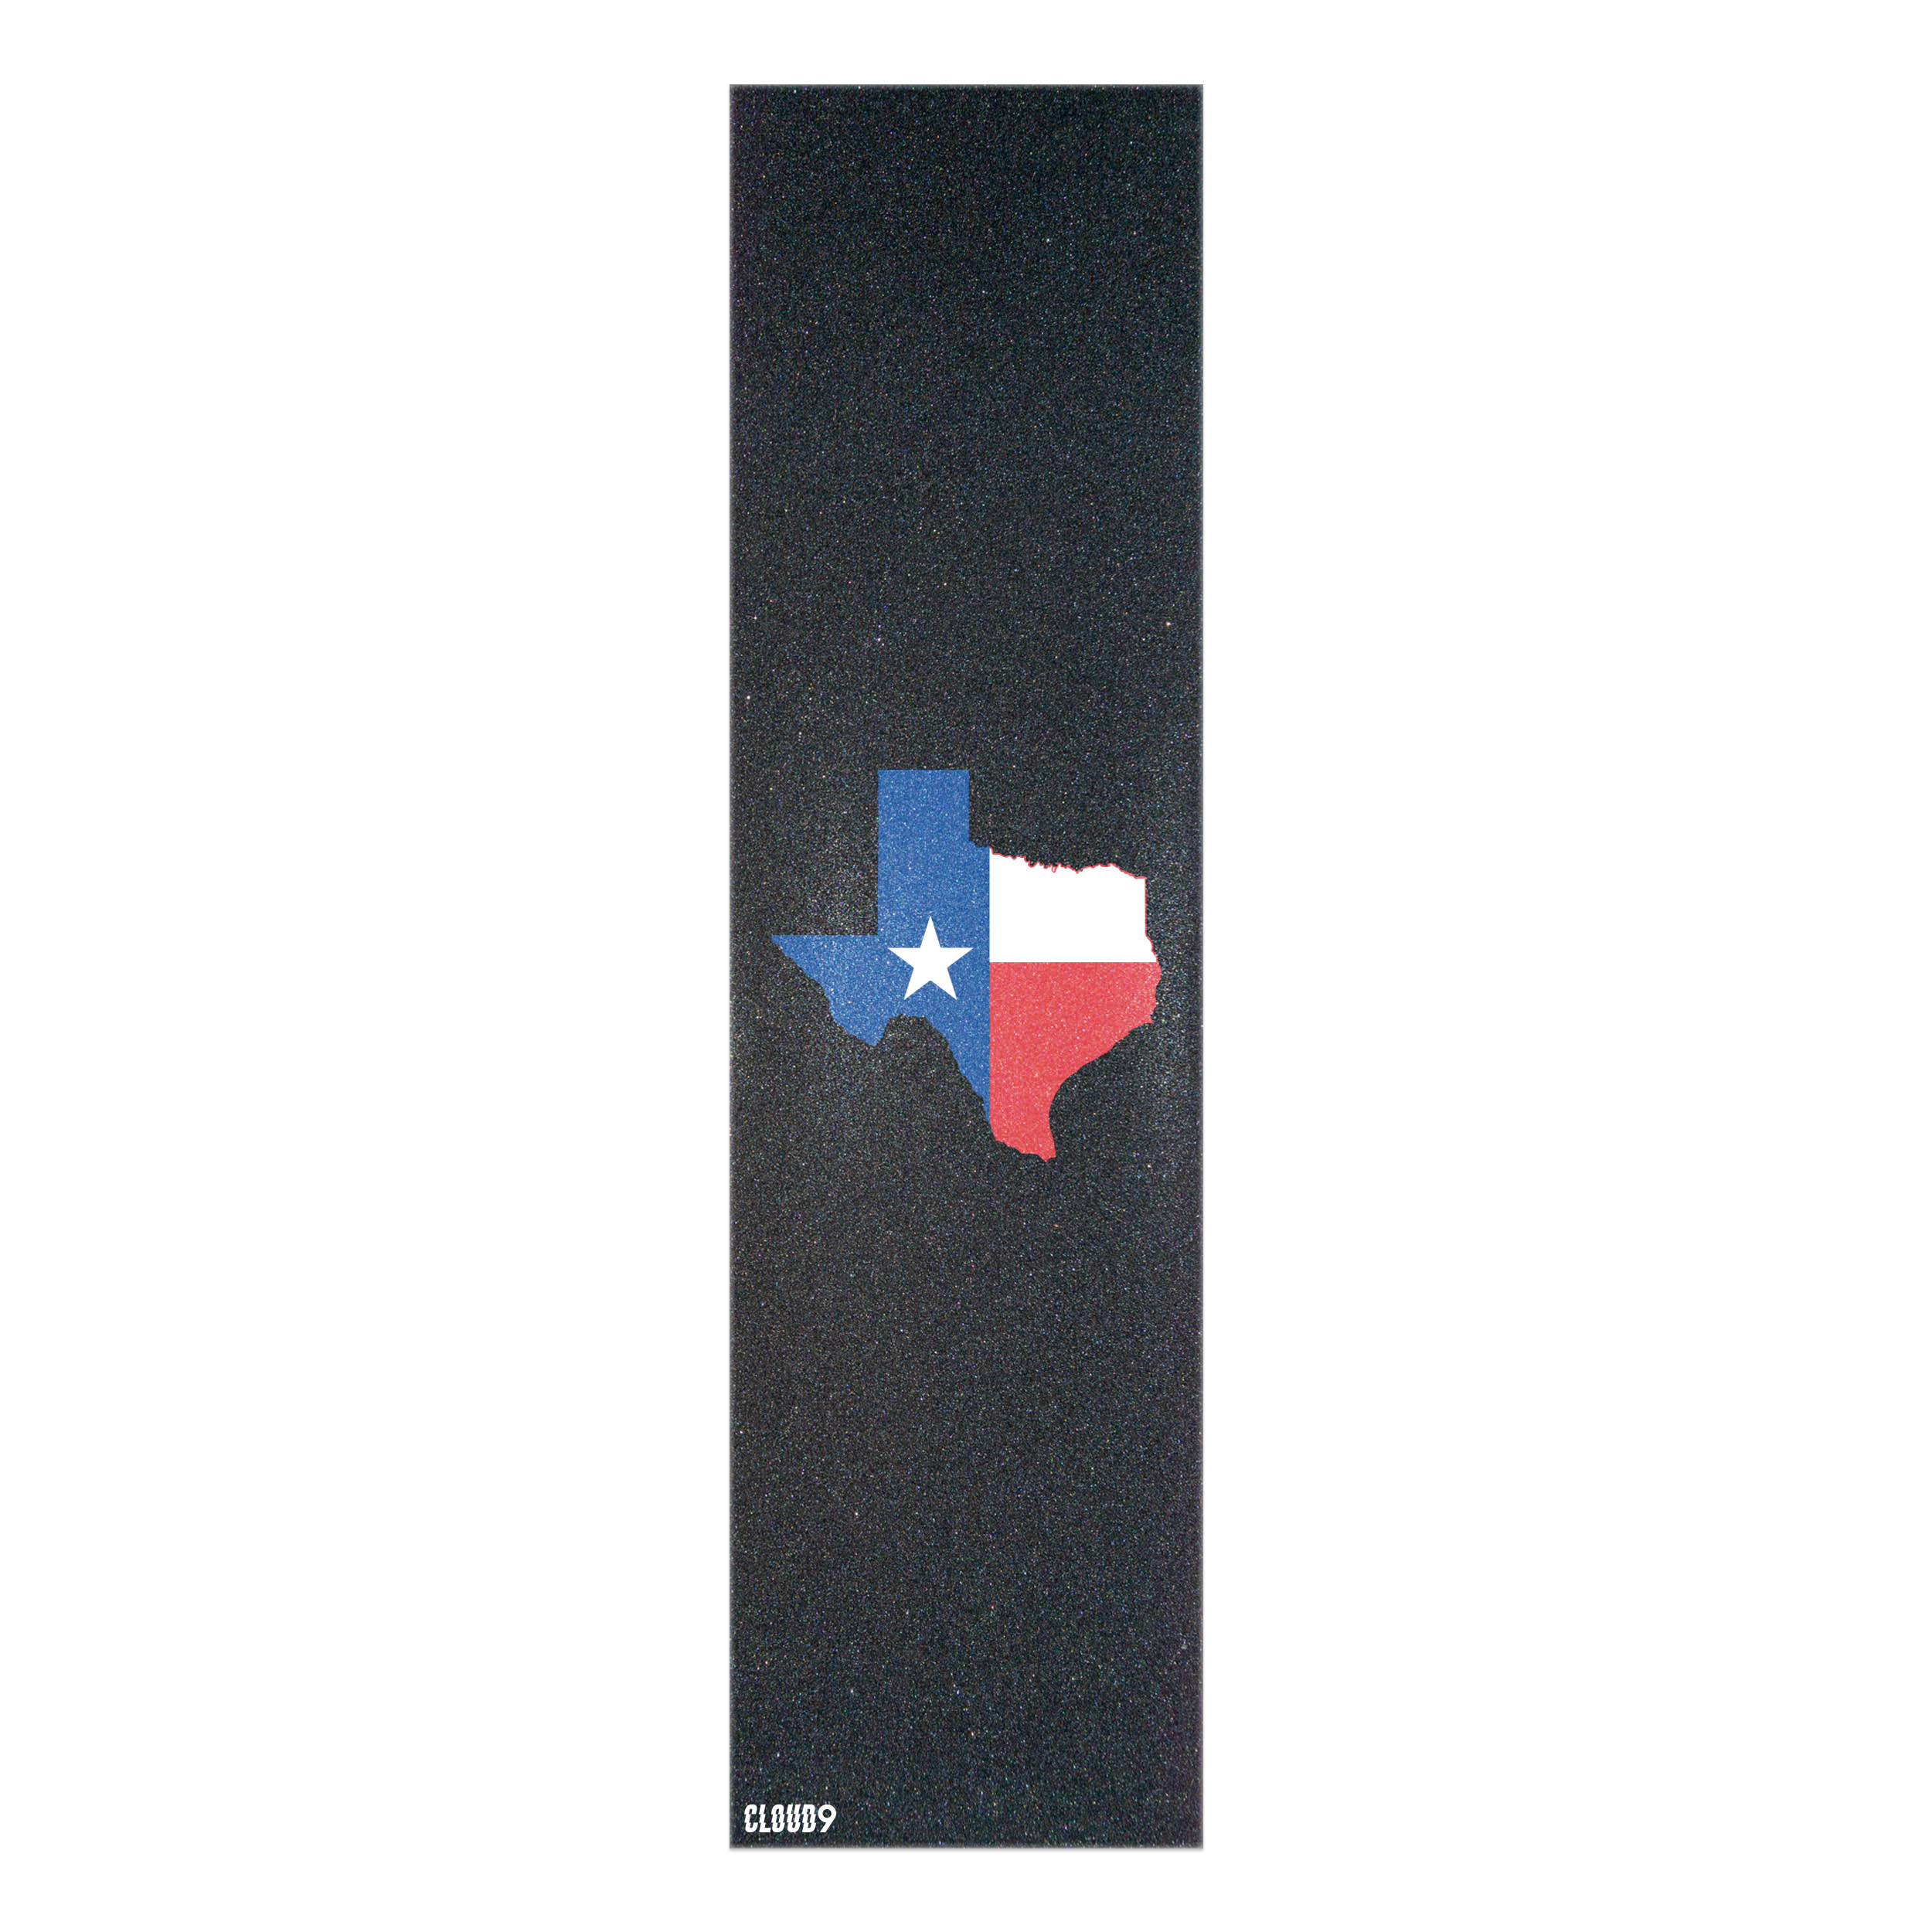 The front of Cloud 9 Texas Griptape.